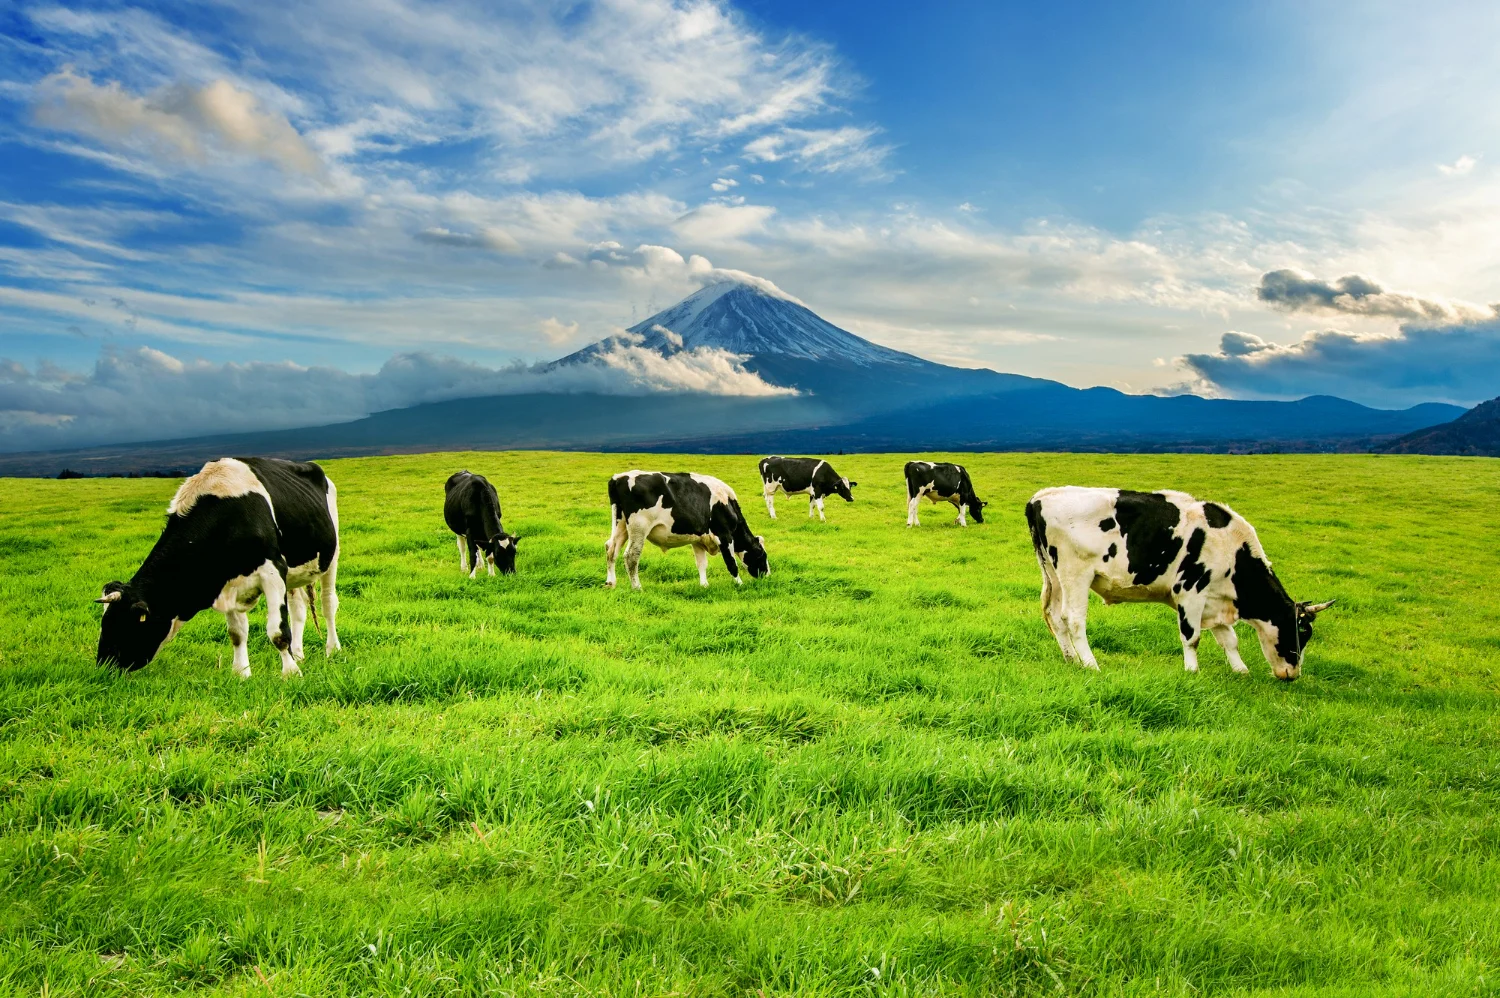 Regenerative grazing: How cattle could become a climate solution